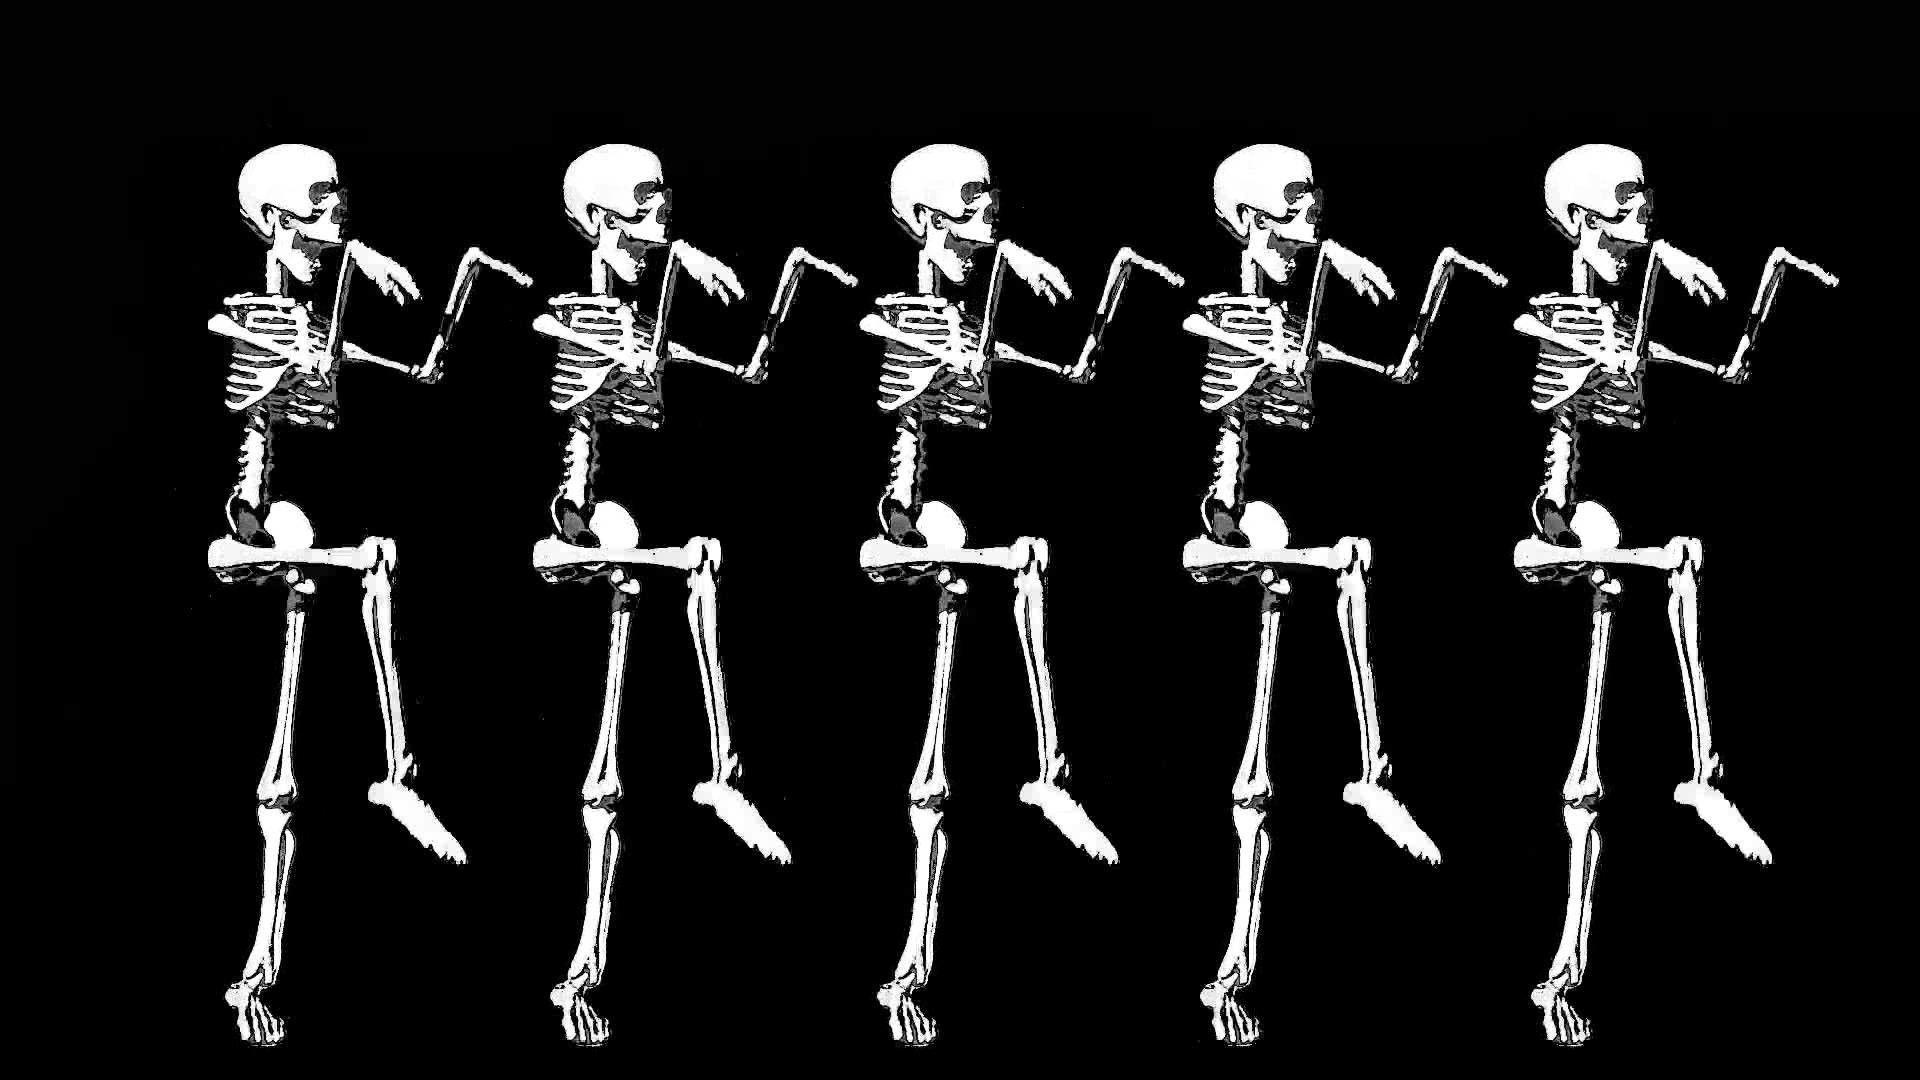 How Spooky Scary Skeletons Became the Internets Halloween Anthem   Skeleton dance Spooky scary Spooky scary skeleton wallpaper